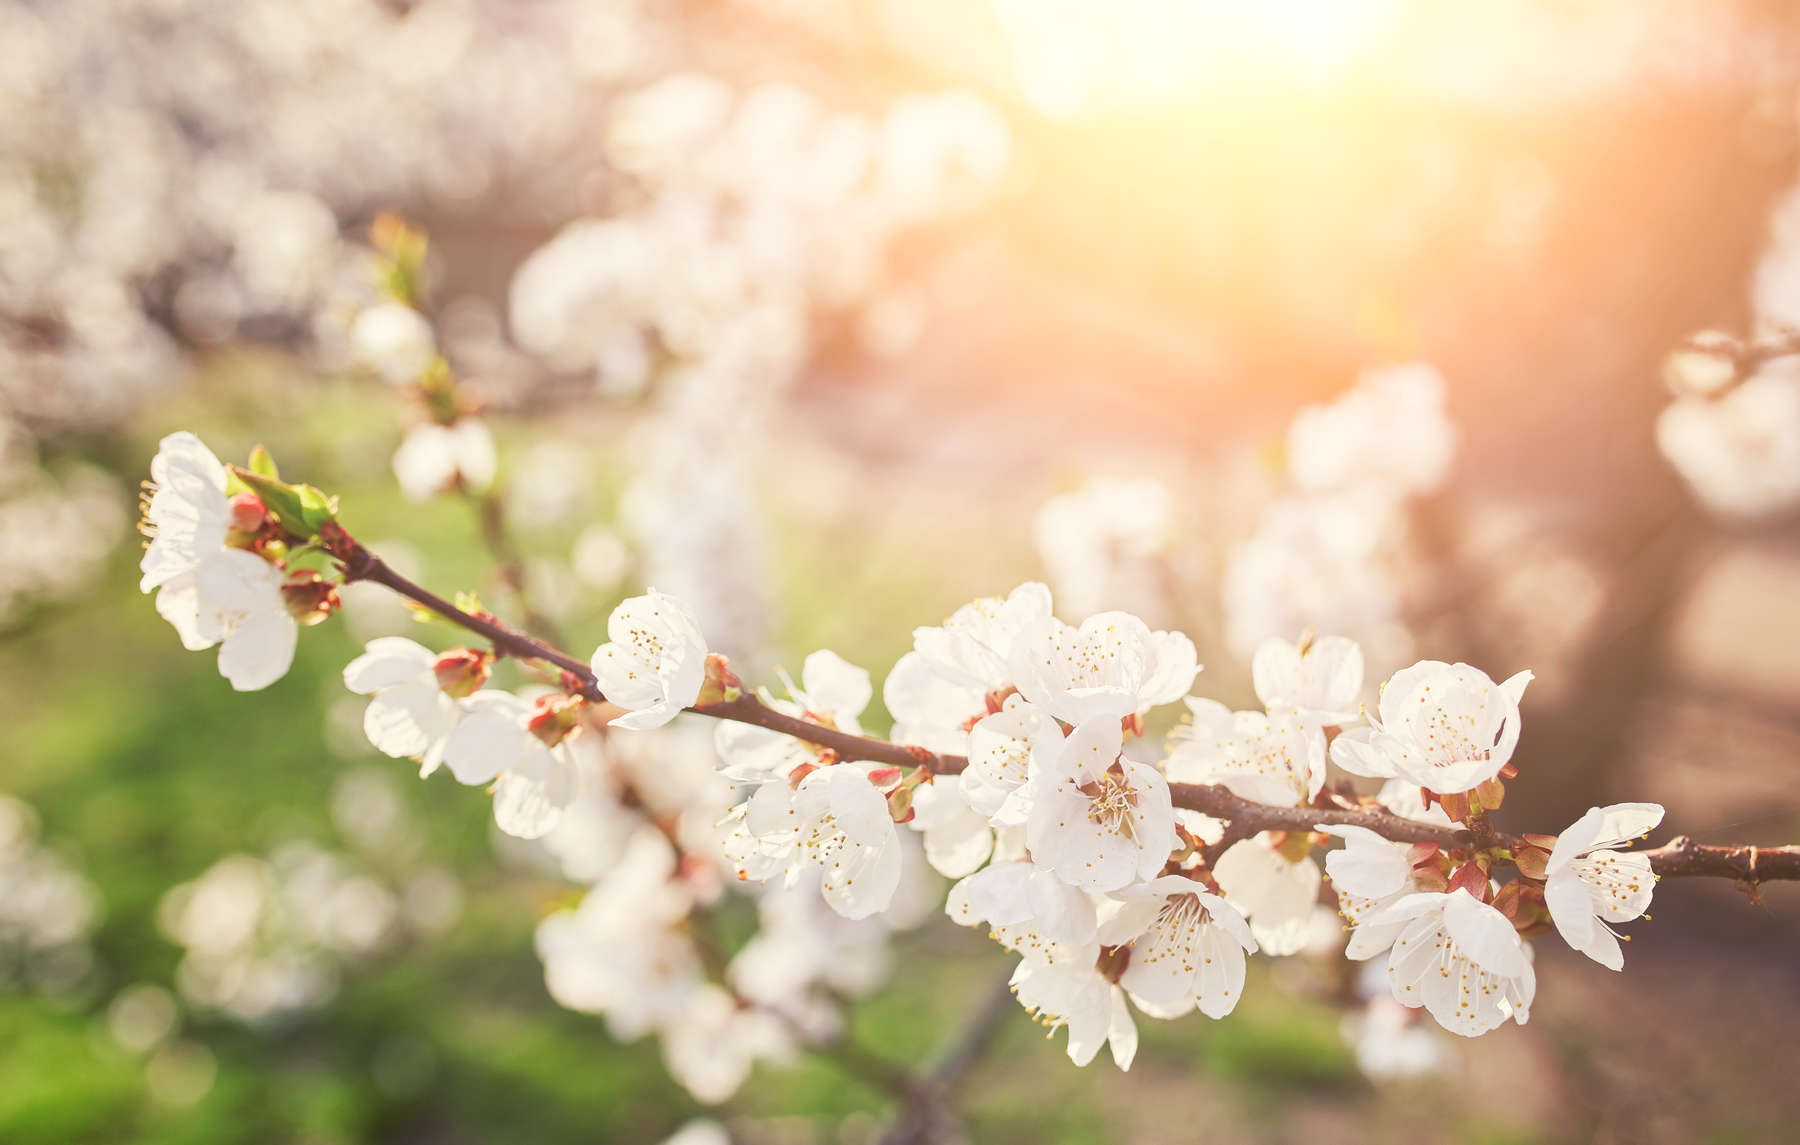 Blossoming of the apricot tree in spring time with white beautif